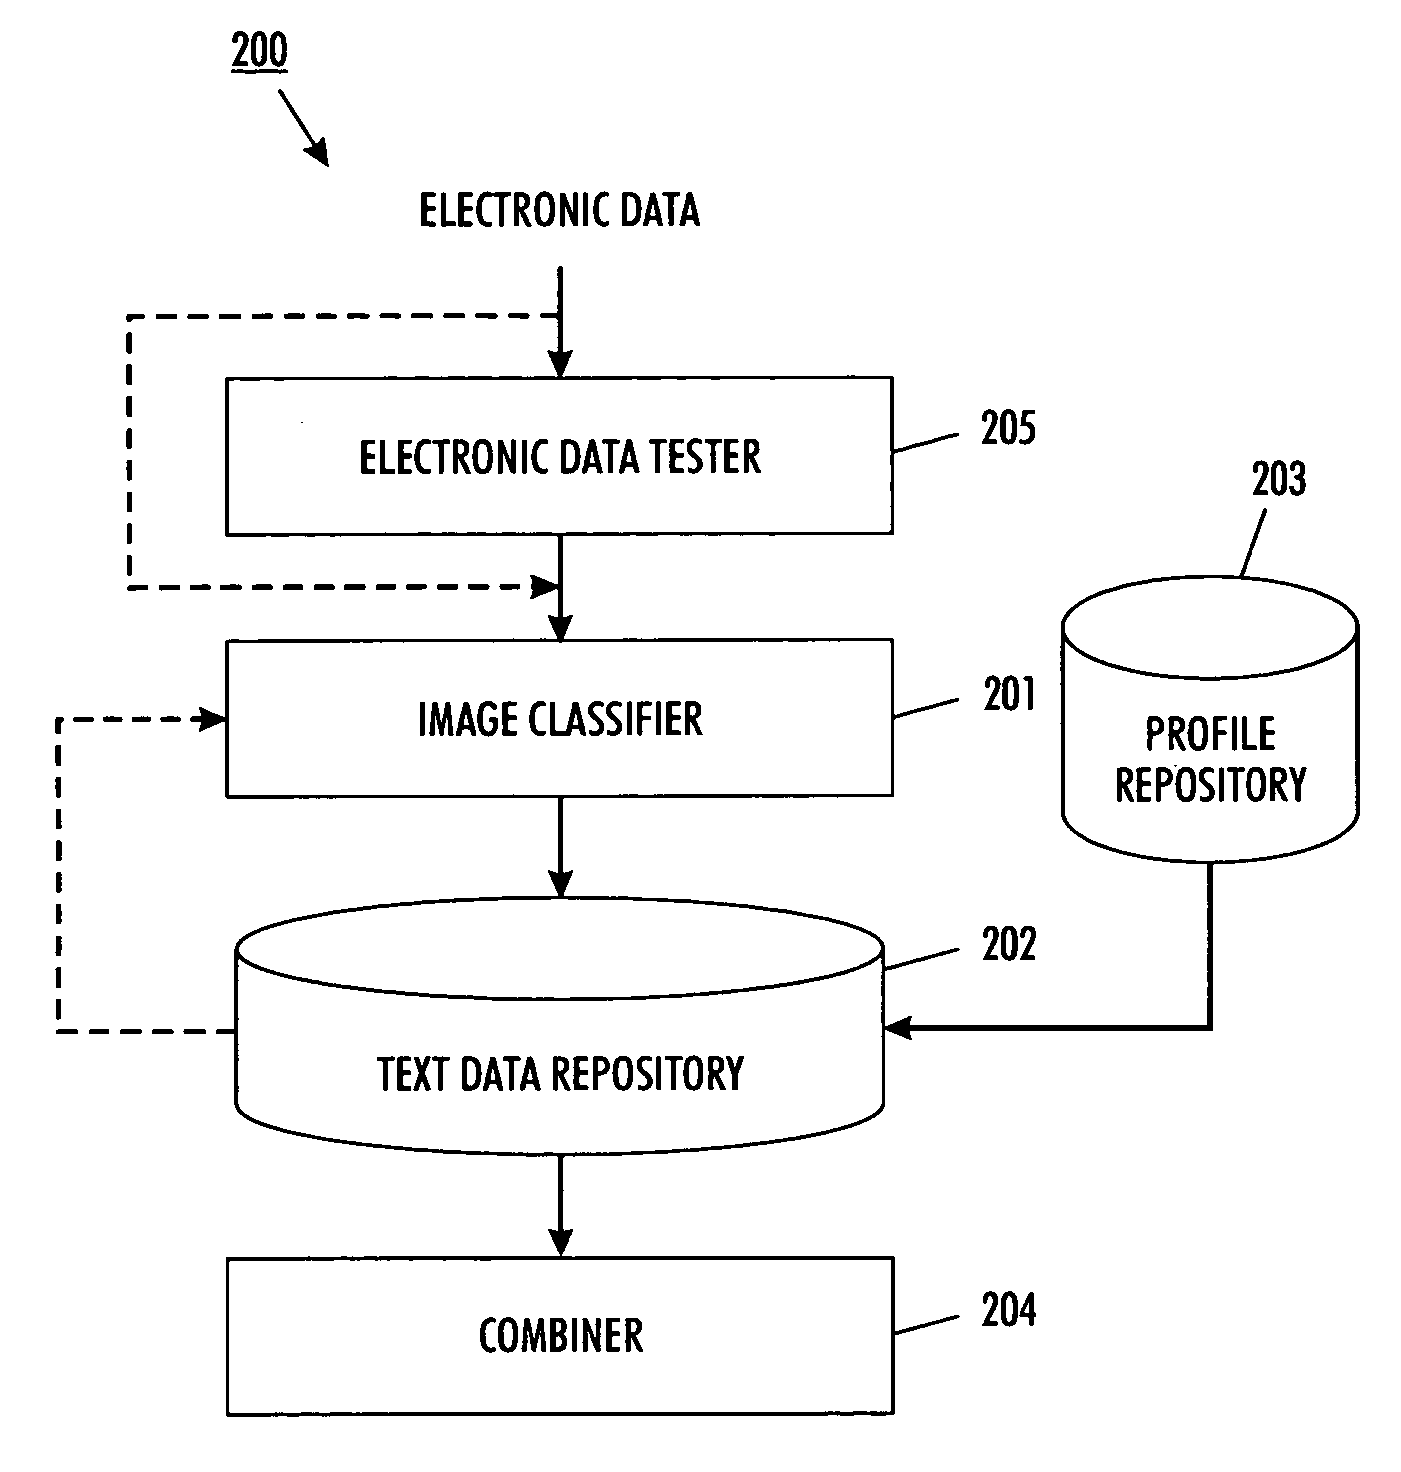 Method and apparatus for automatically combining a digital image with text data